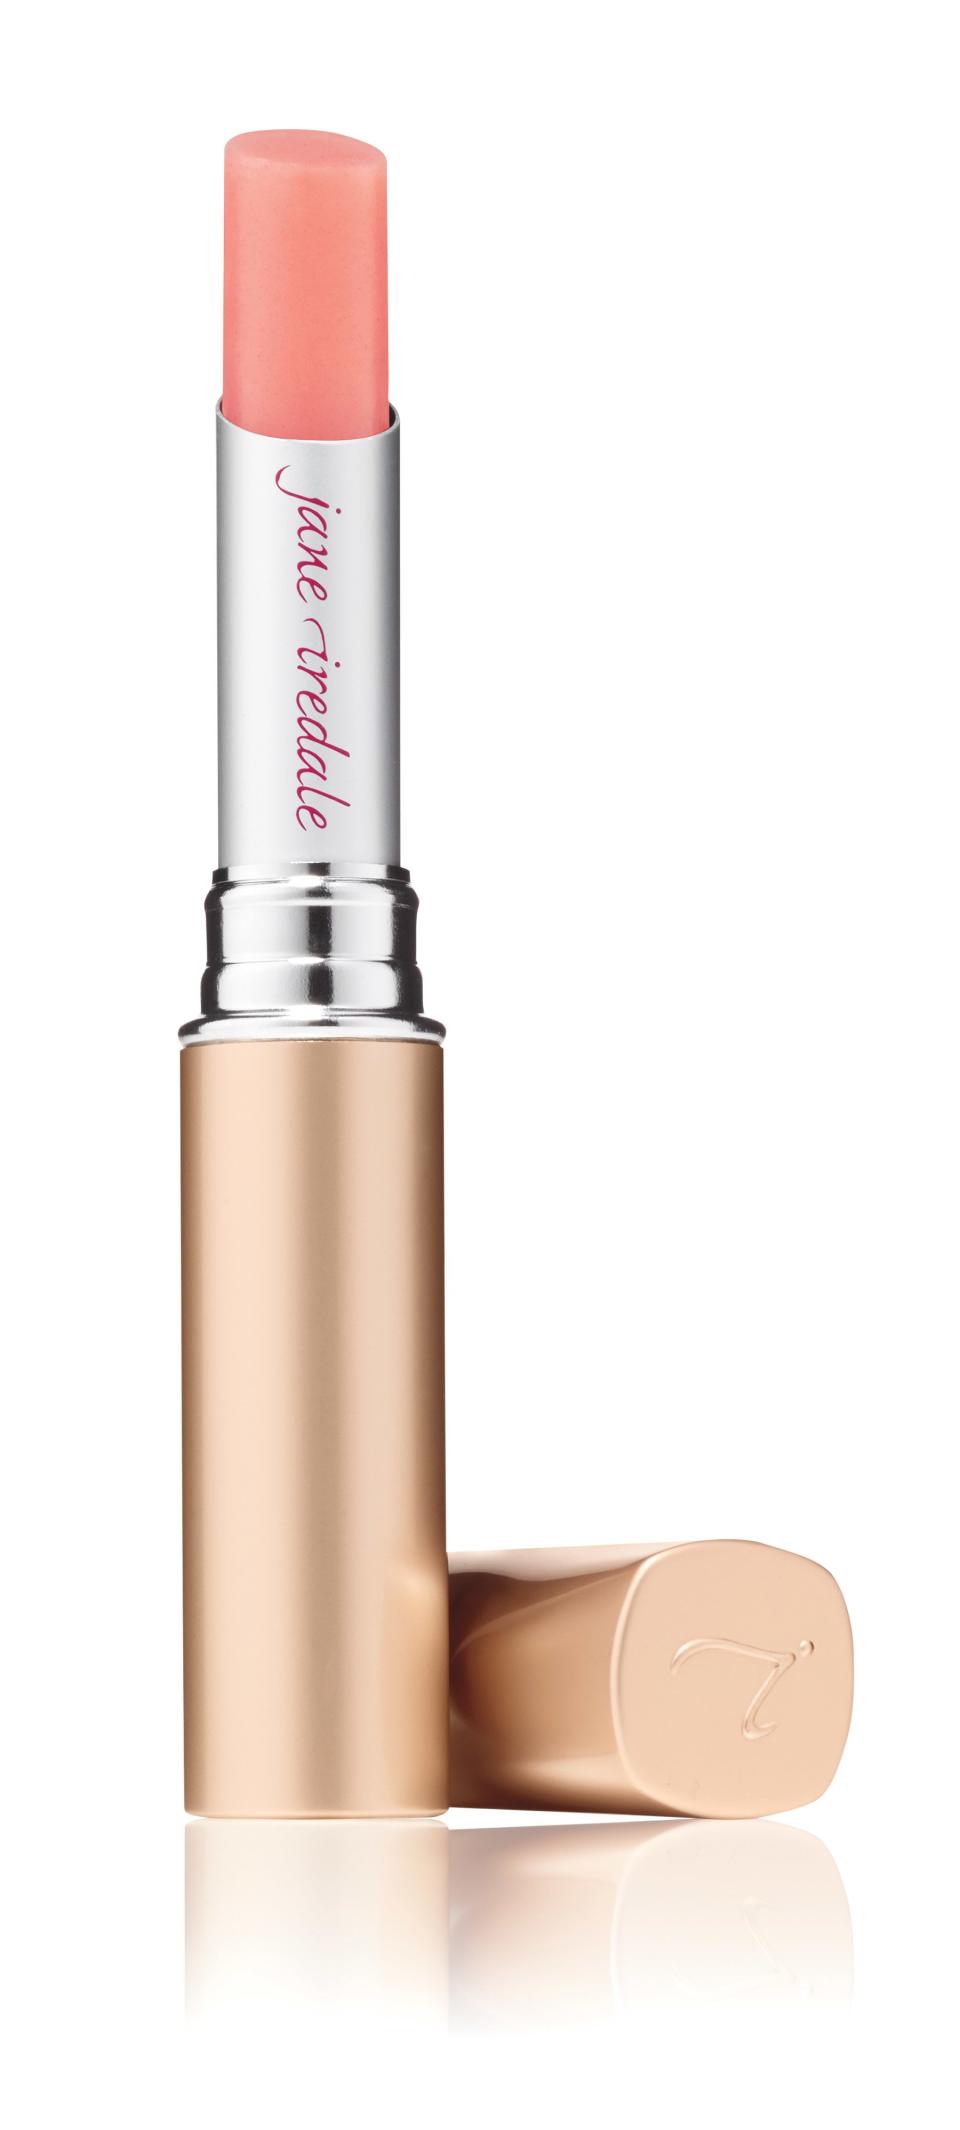 Jane Iredale 'Forever Pink' Just Kissed Lip and Cheek Stain